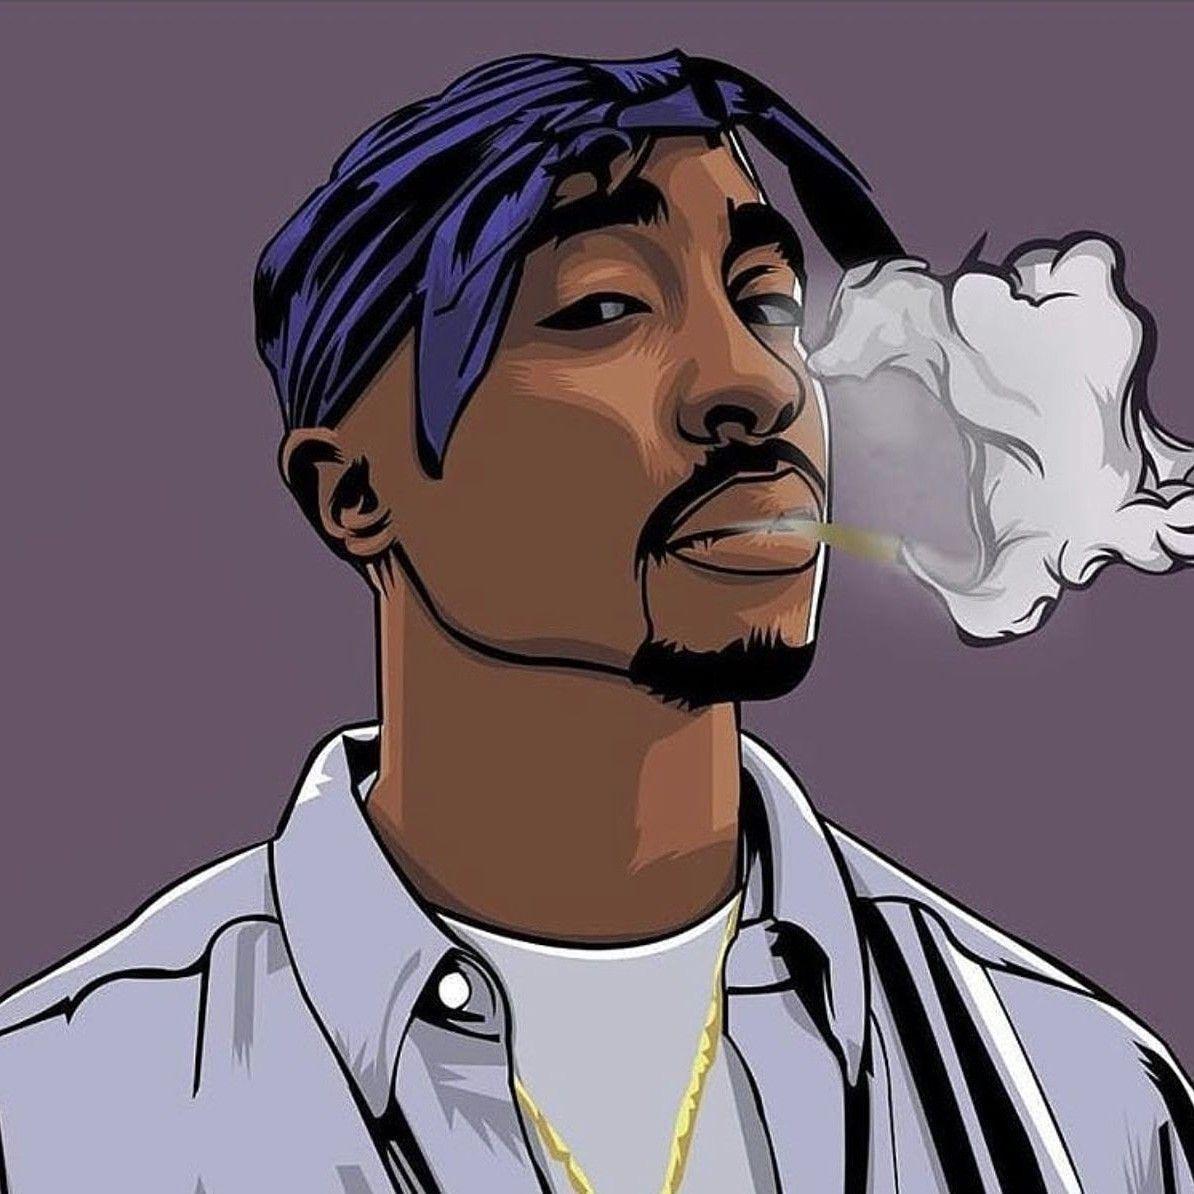 cool animated wallpapers of famous rappers